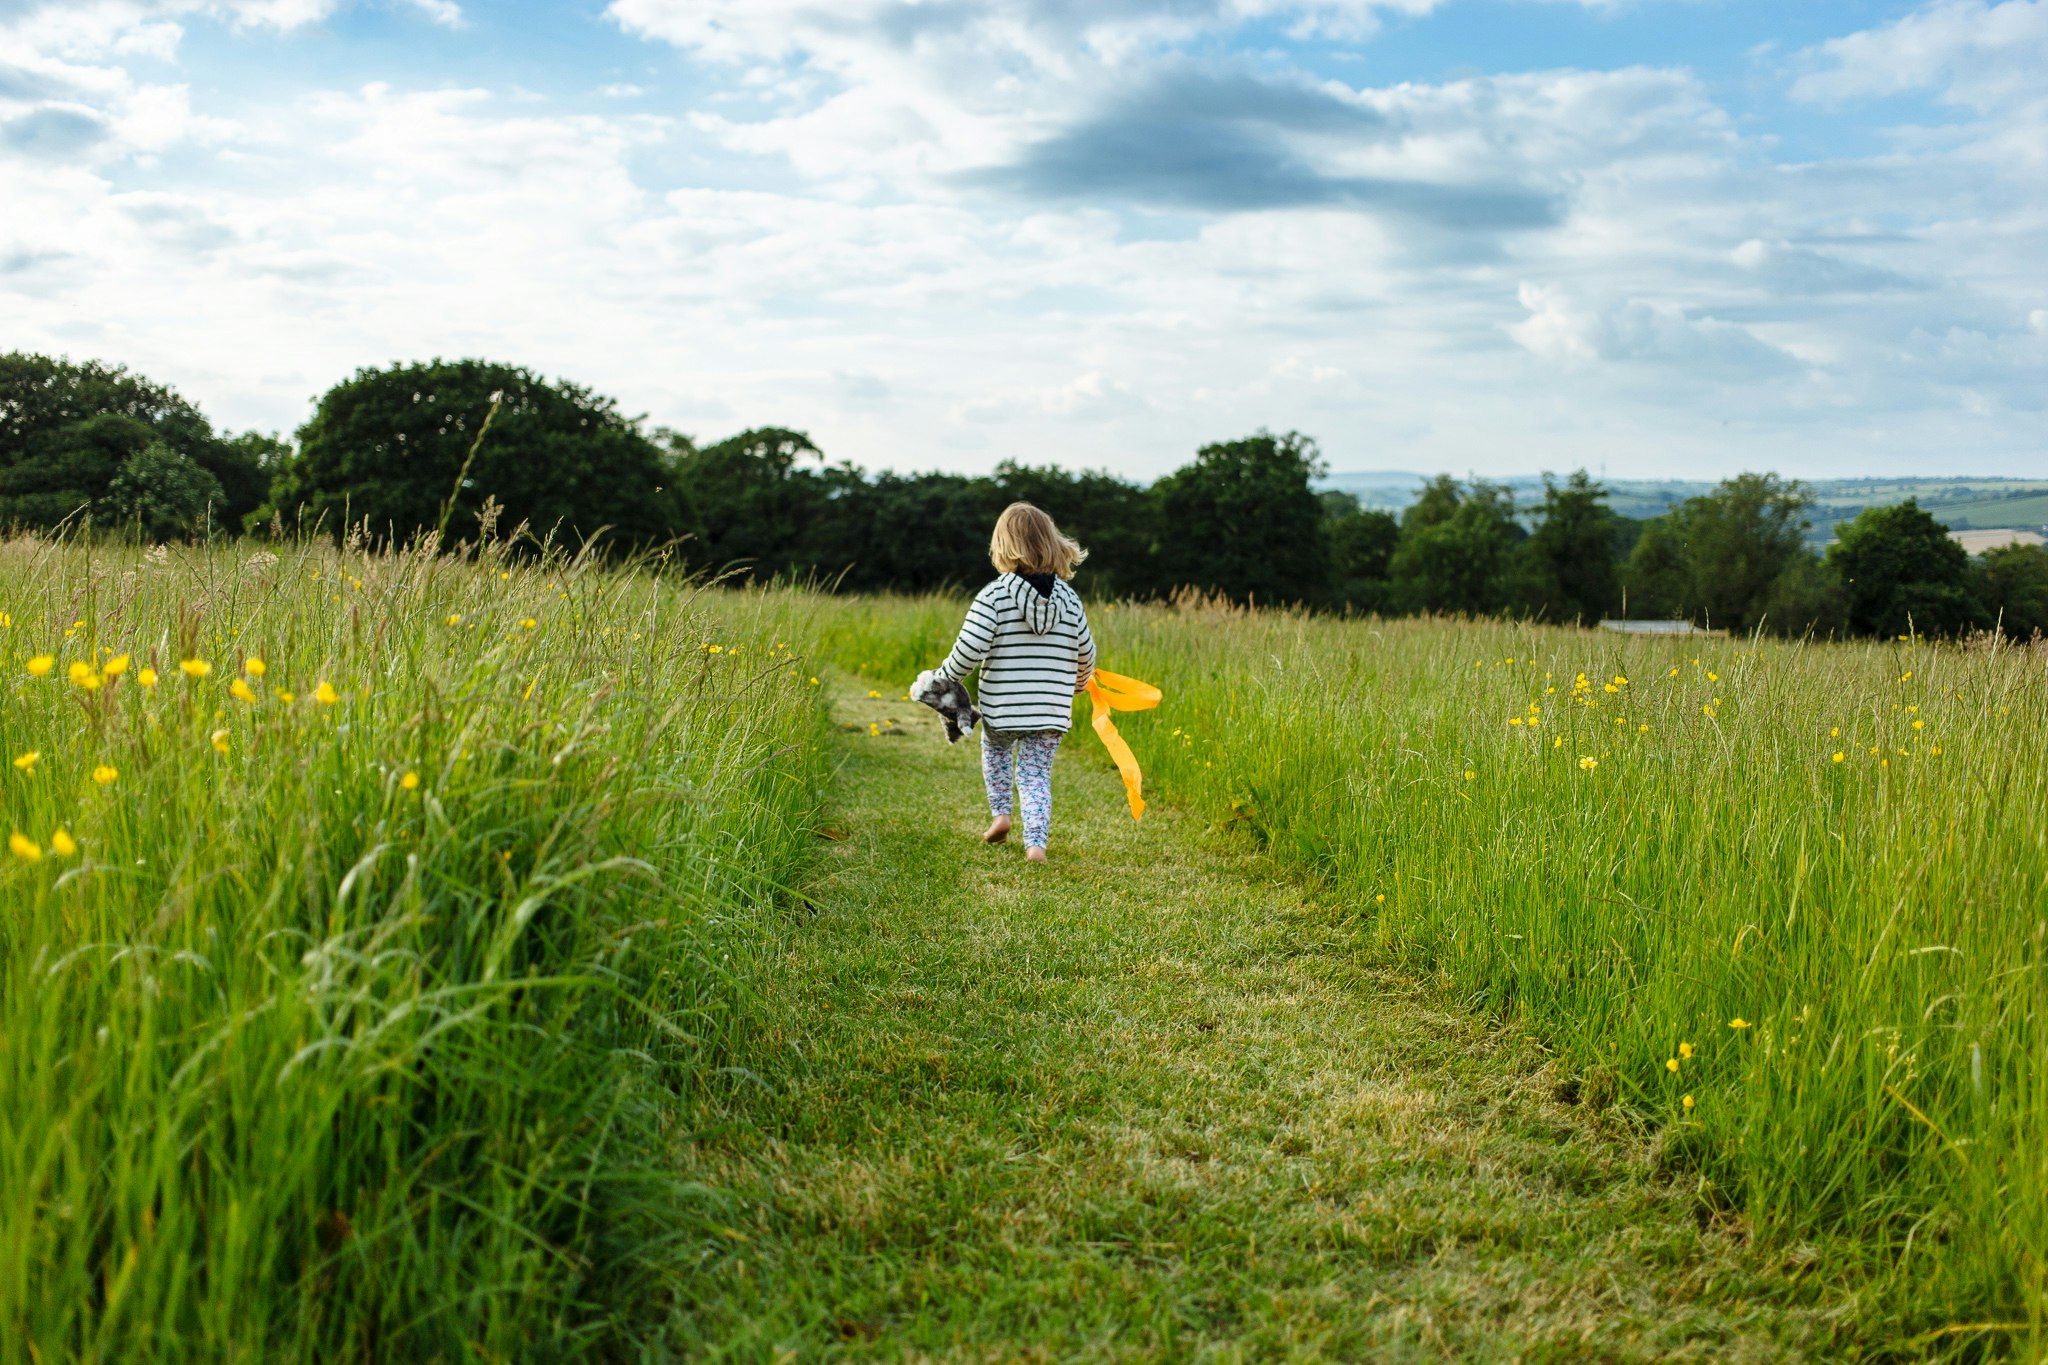 A preschool-aged child walks barefoot away from the camera down a path between wildflower fields